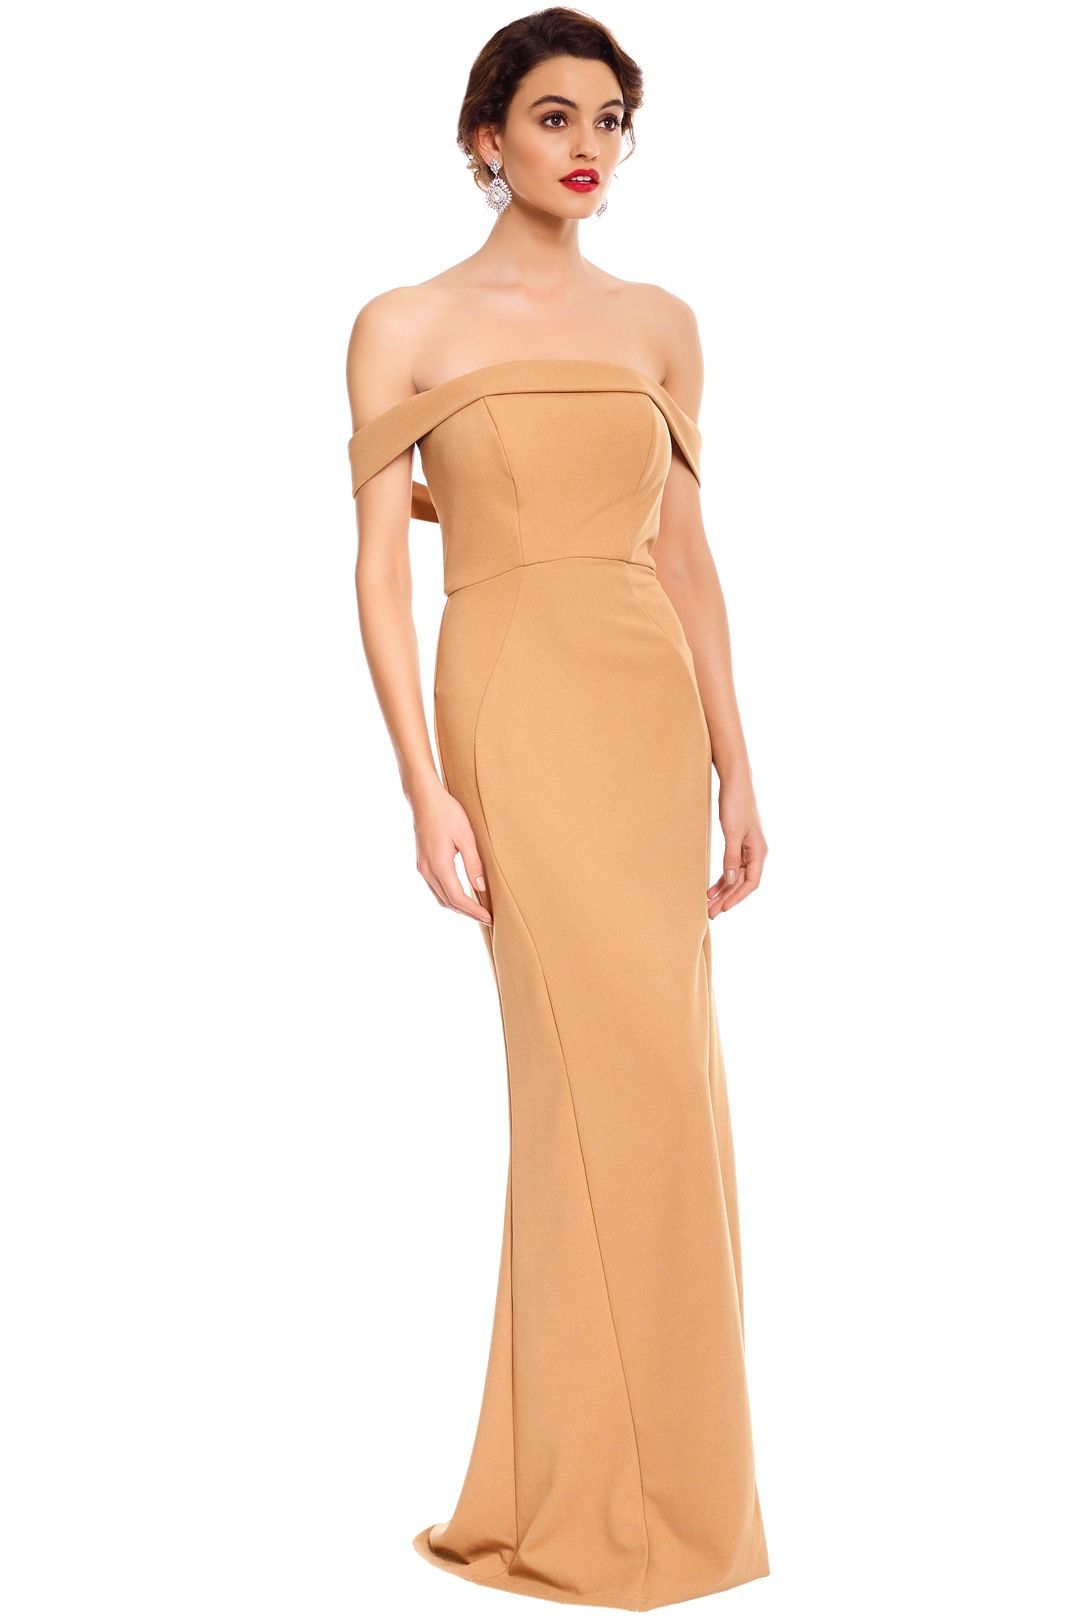 George - Lola Gown - Nude - Side